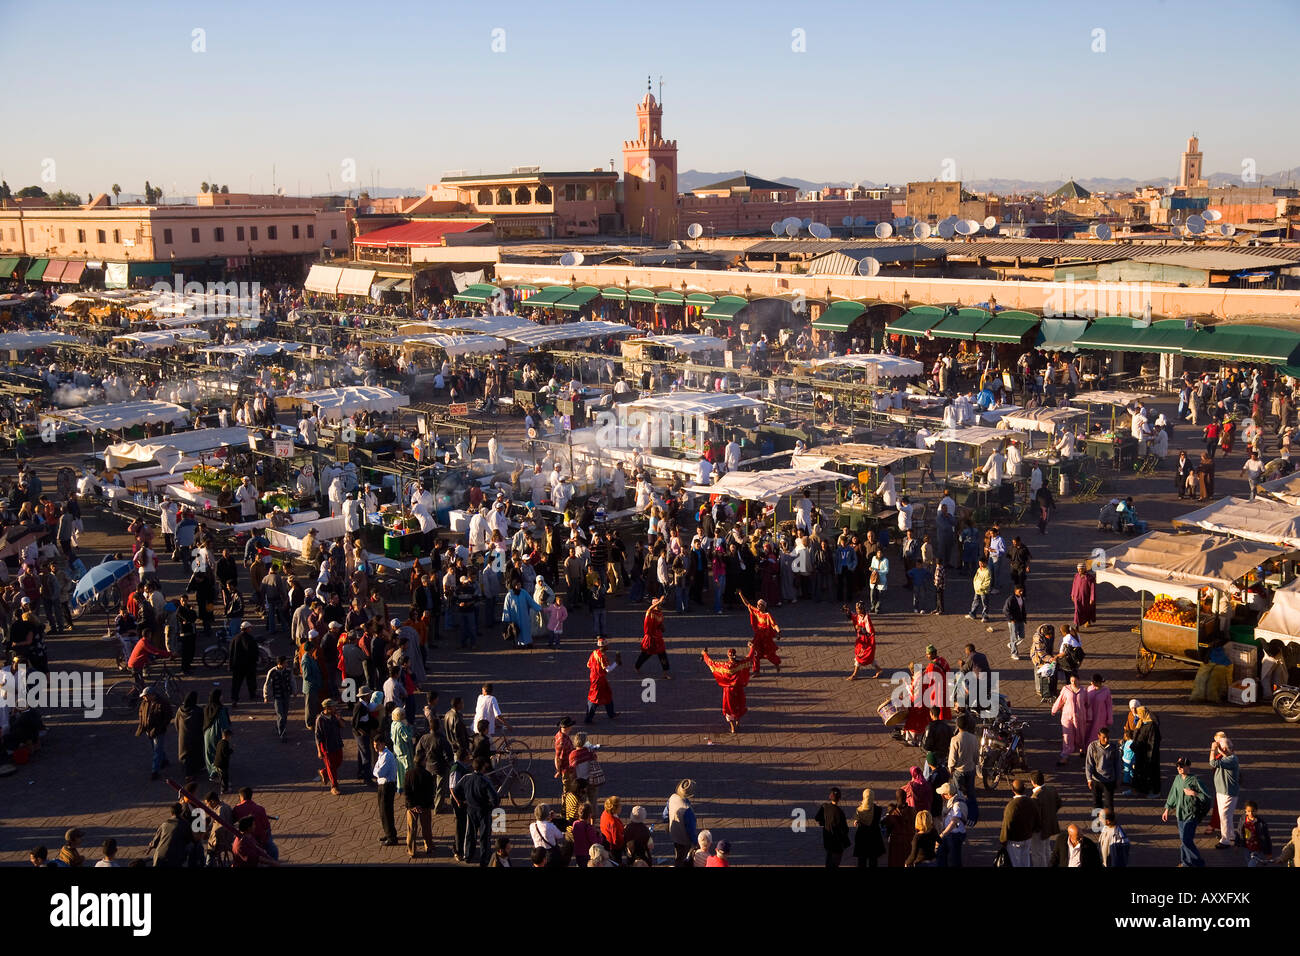 Djemaa el-Fna, with food stalls filling the square in the evening, Marrakech (Marrakesh), Morocco, North Africa Stock Photo